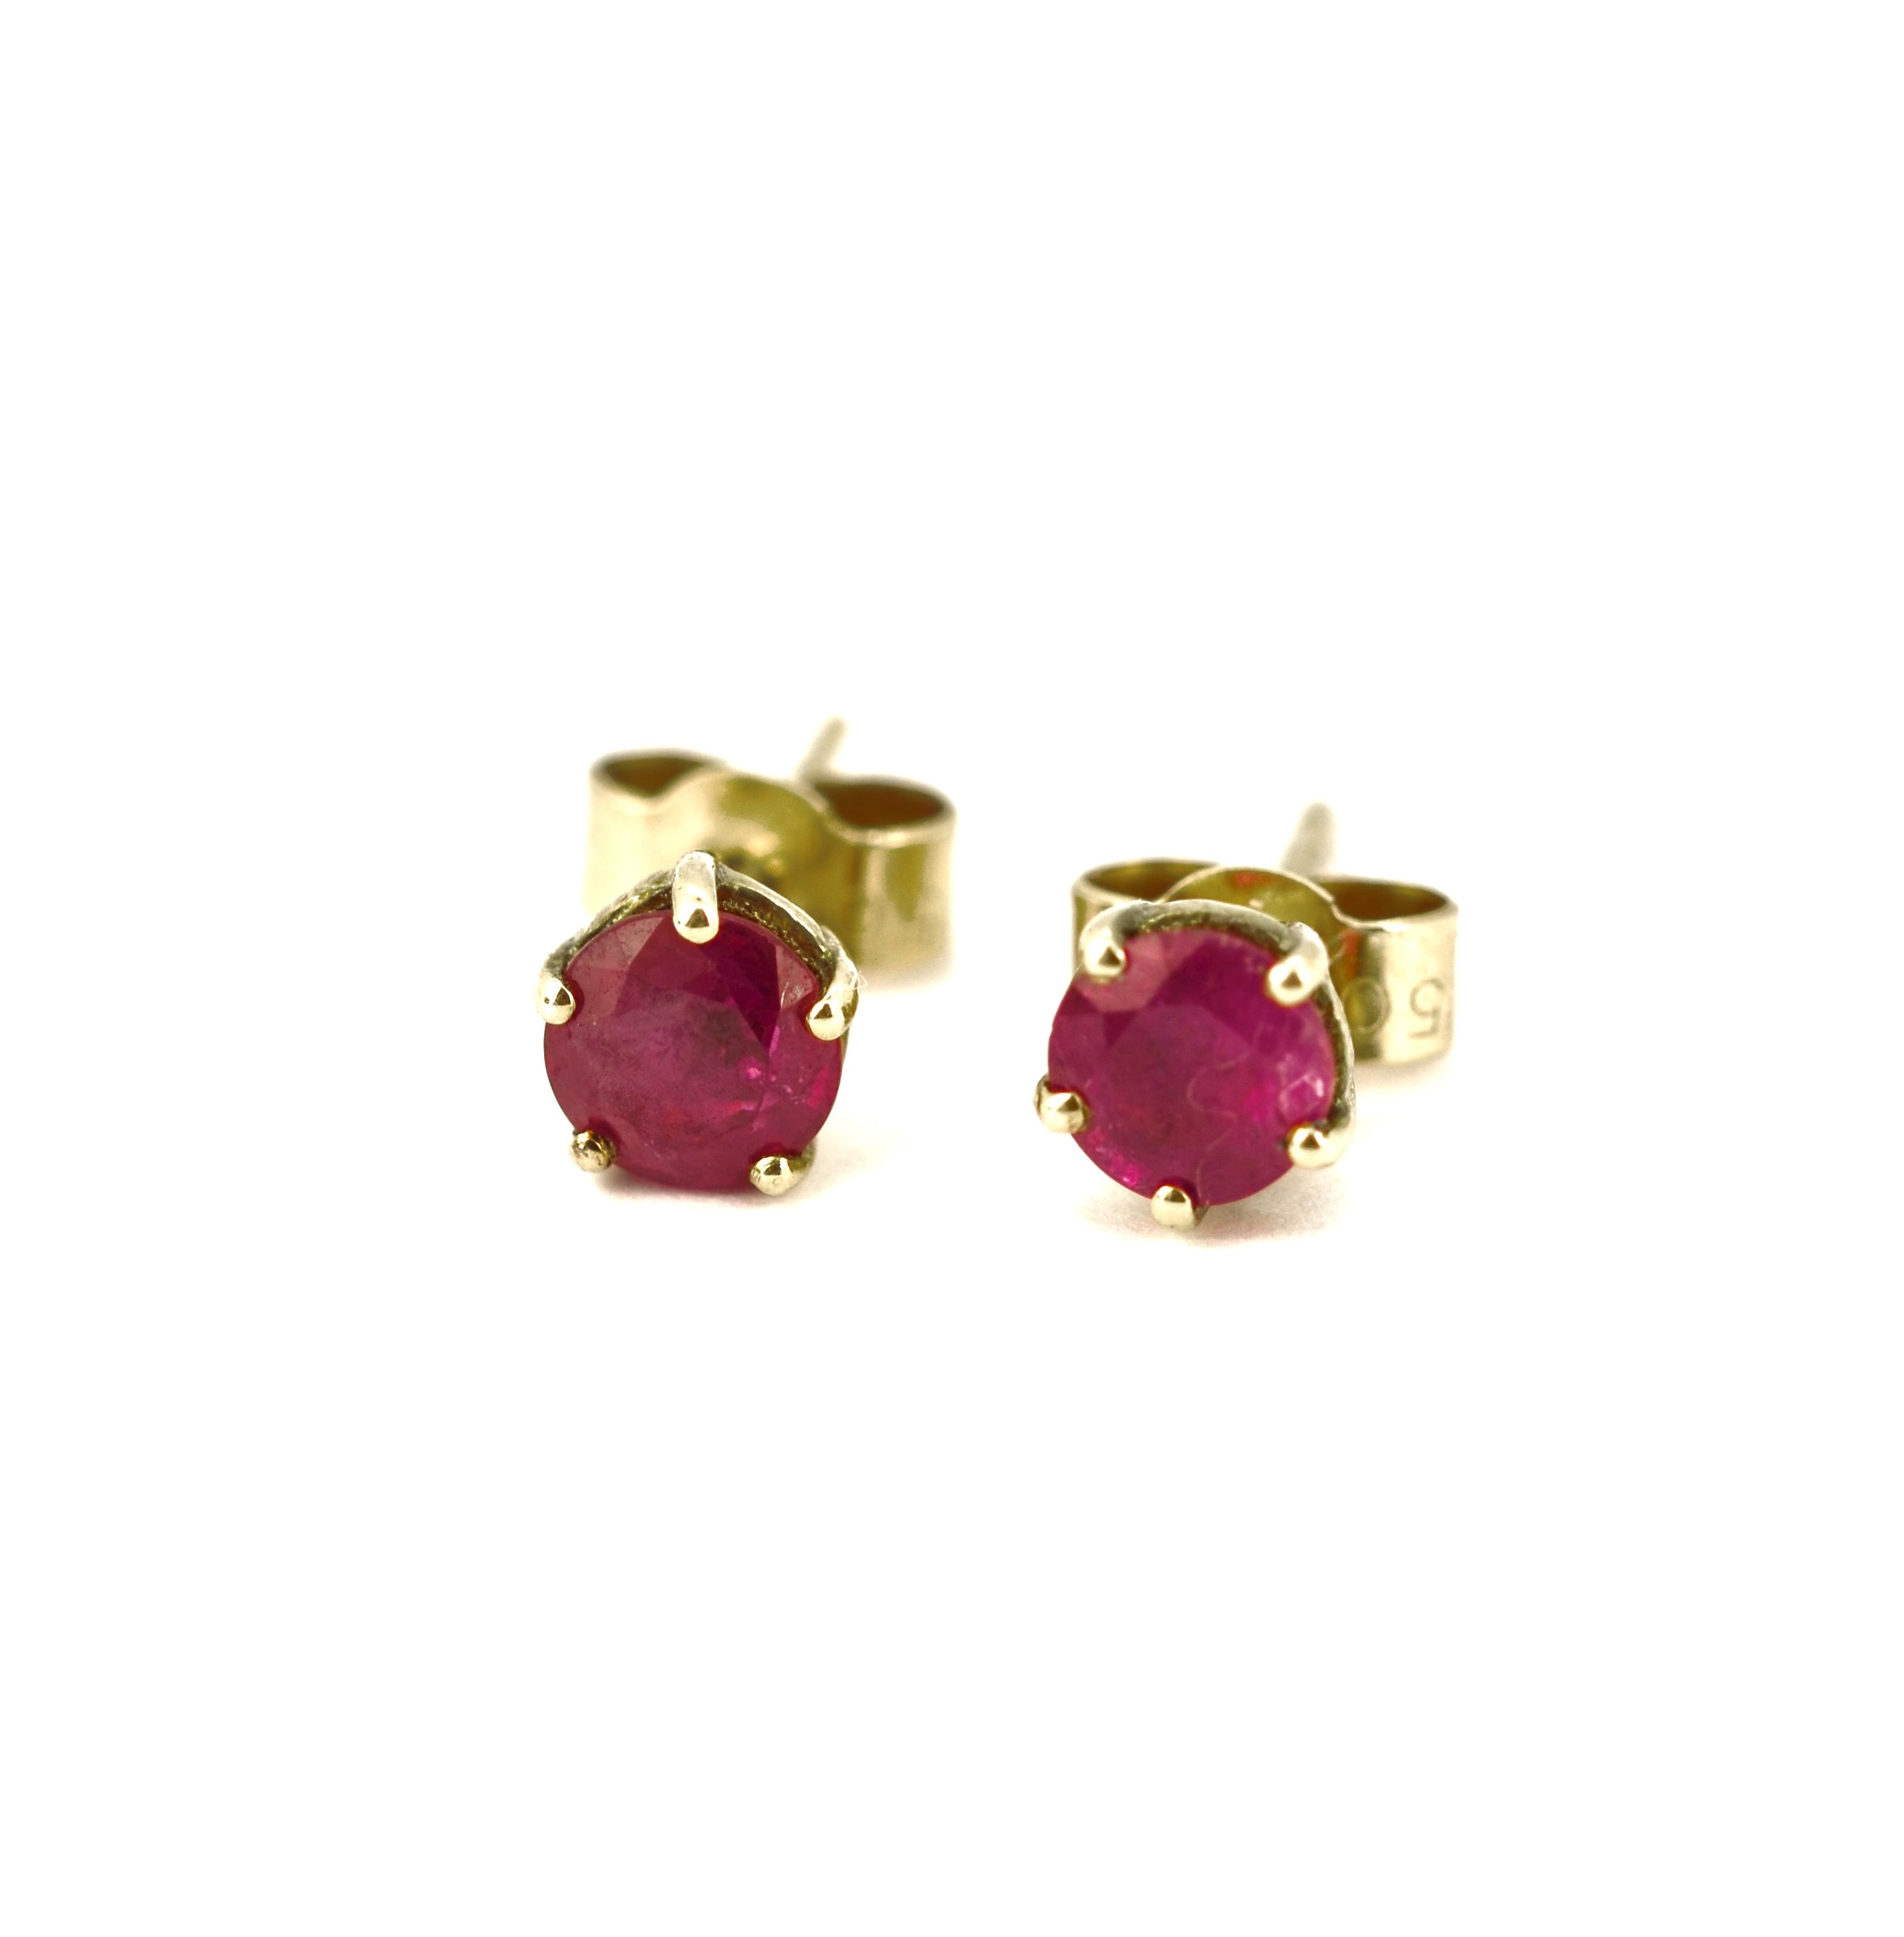 A pair of hallmarked 18ct yellow gold stud earrings set with round cut rubies, L. 0.5cm.